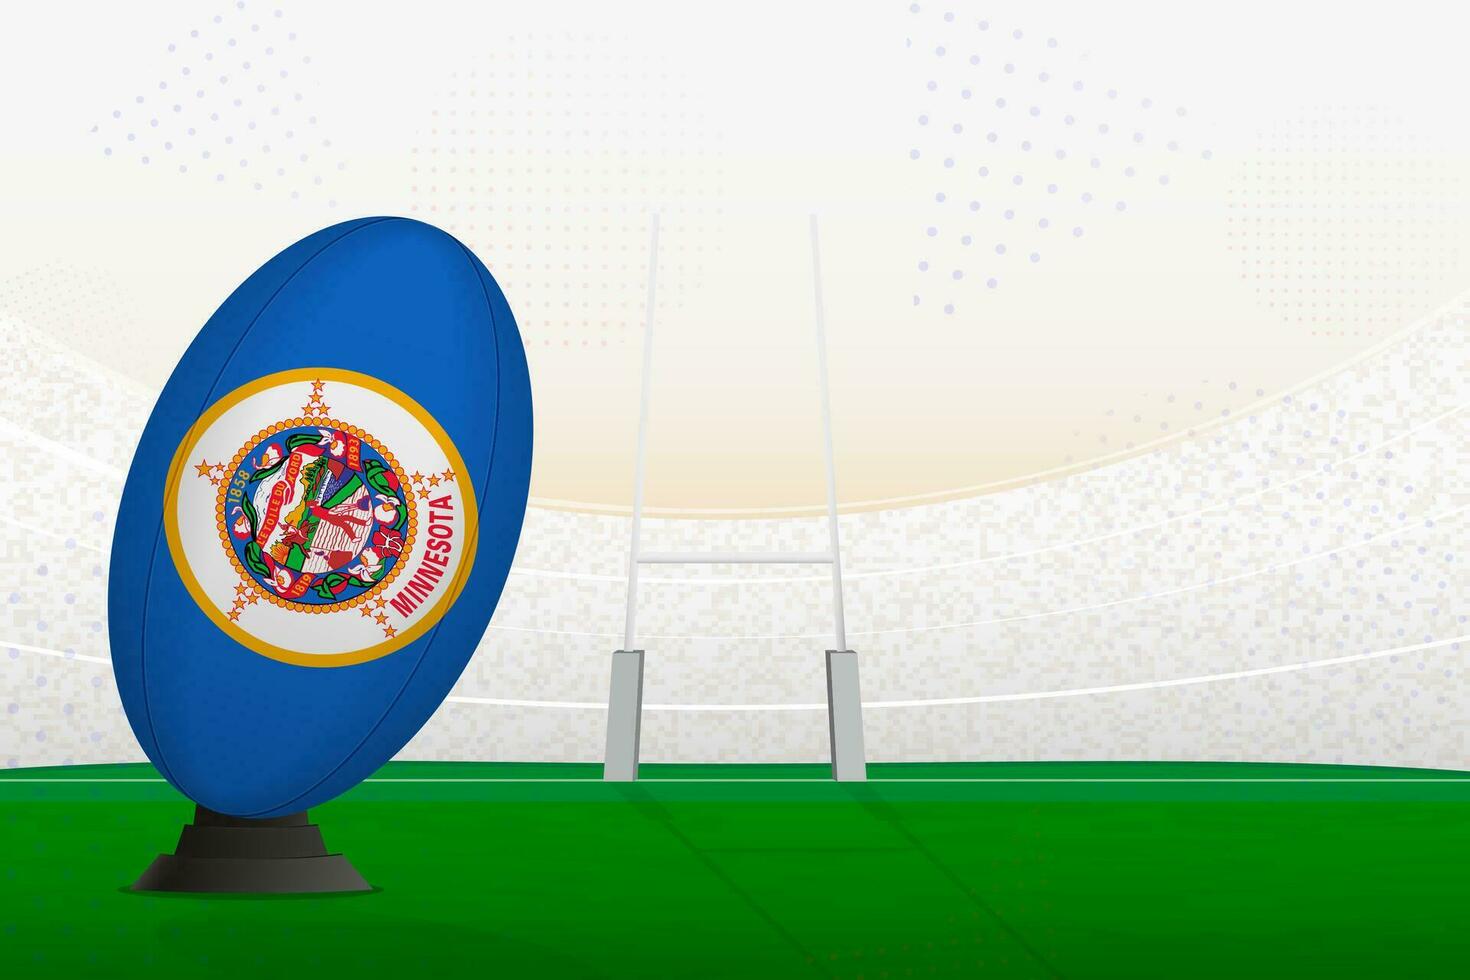 Minnesota national team rugby ball on rugby stadium and goal posts, preparing for a penalty or free kick. vector